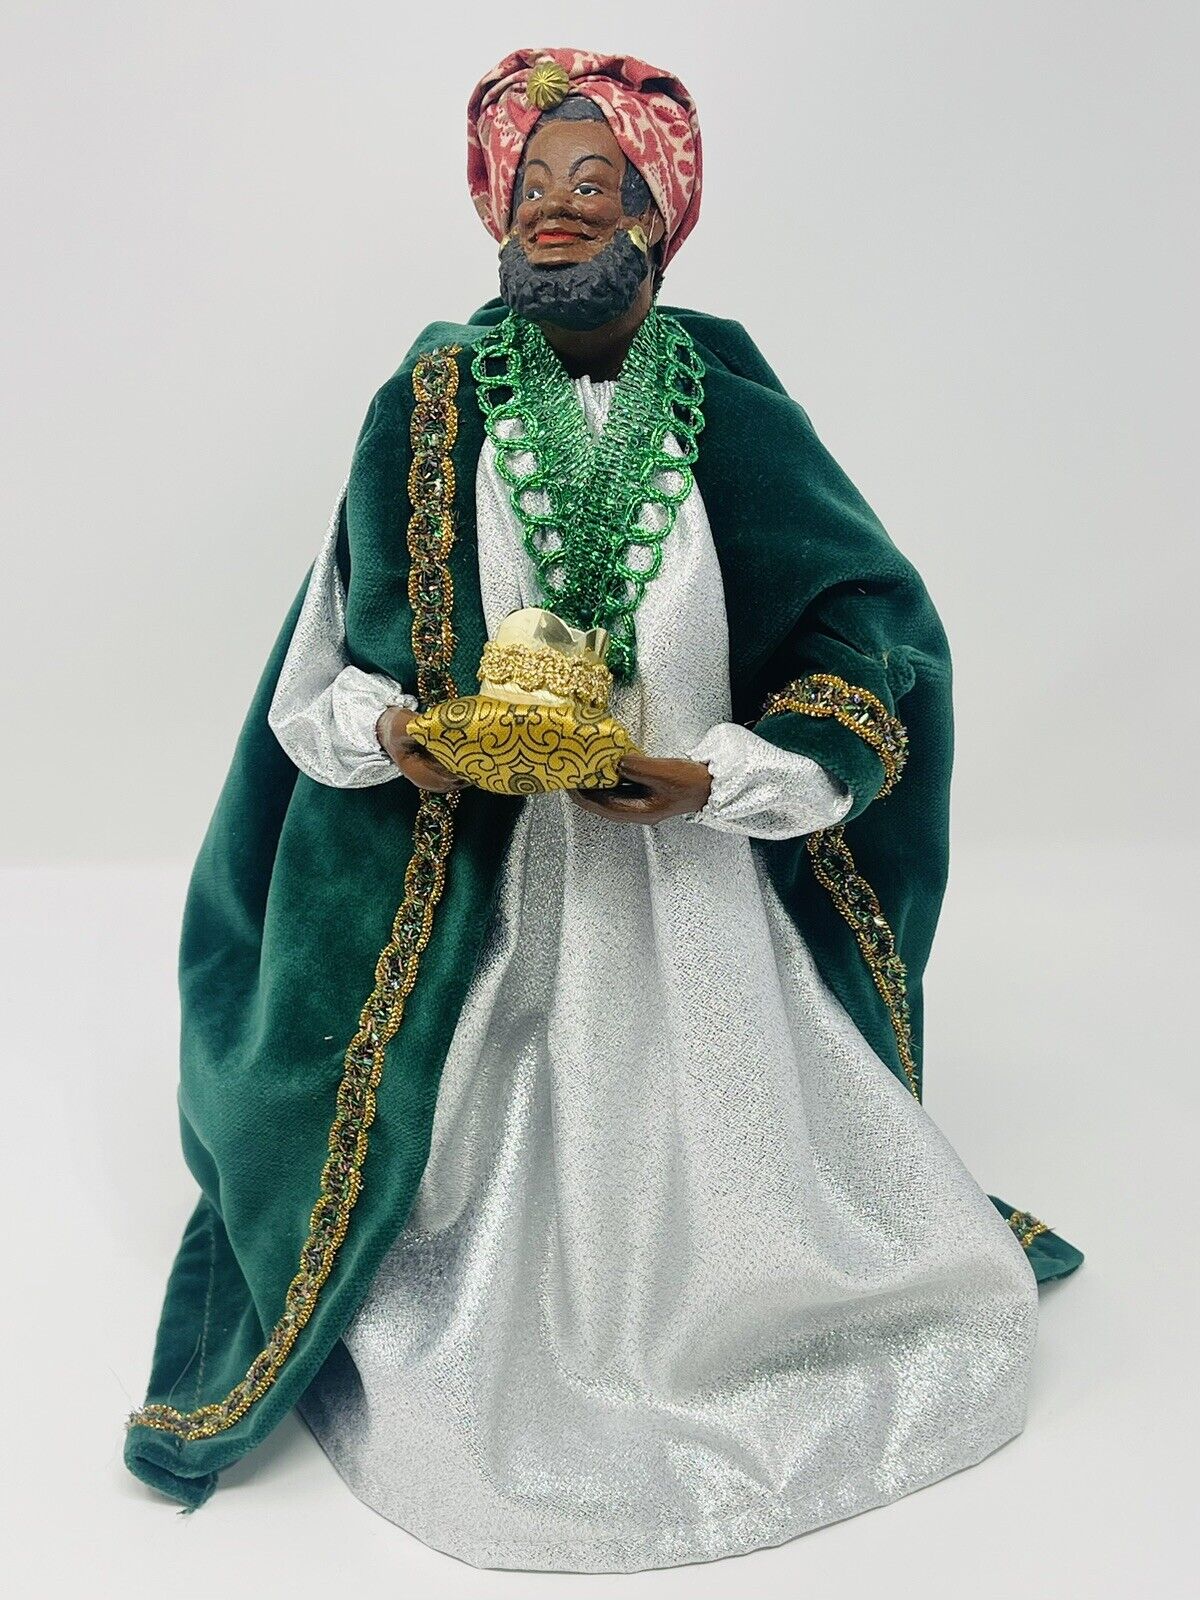 Vtg Santon Clay Figurine of Provence Signed S. Jouglas King Sherphed Wise Man